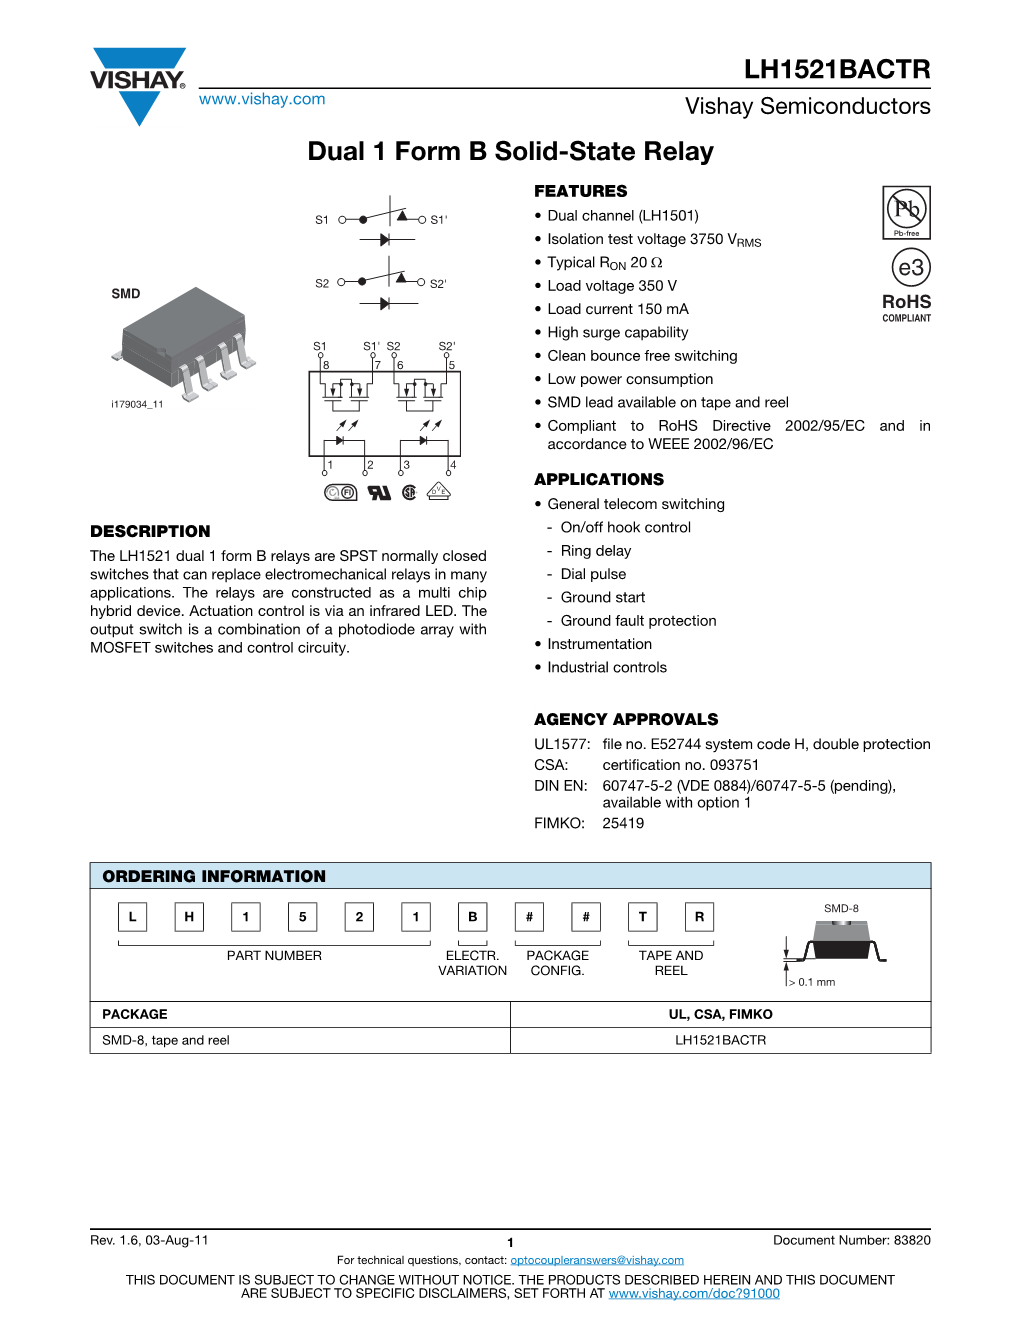 LH1521BACTR Dual 1 Form B Solid-State Relay